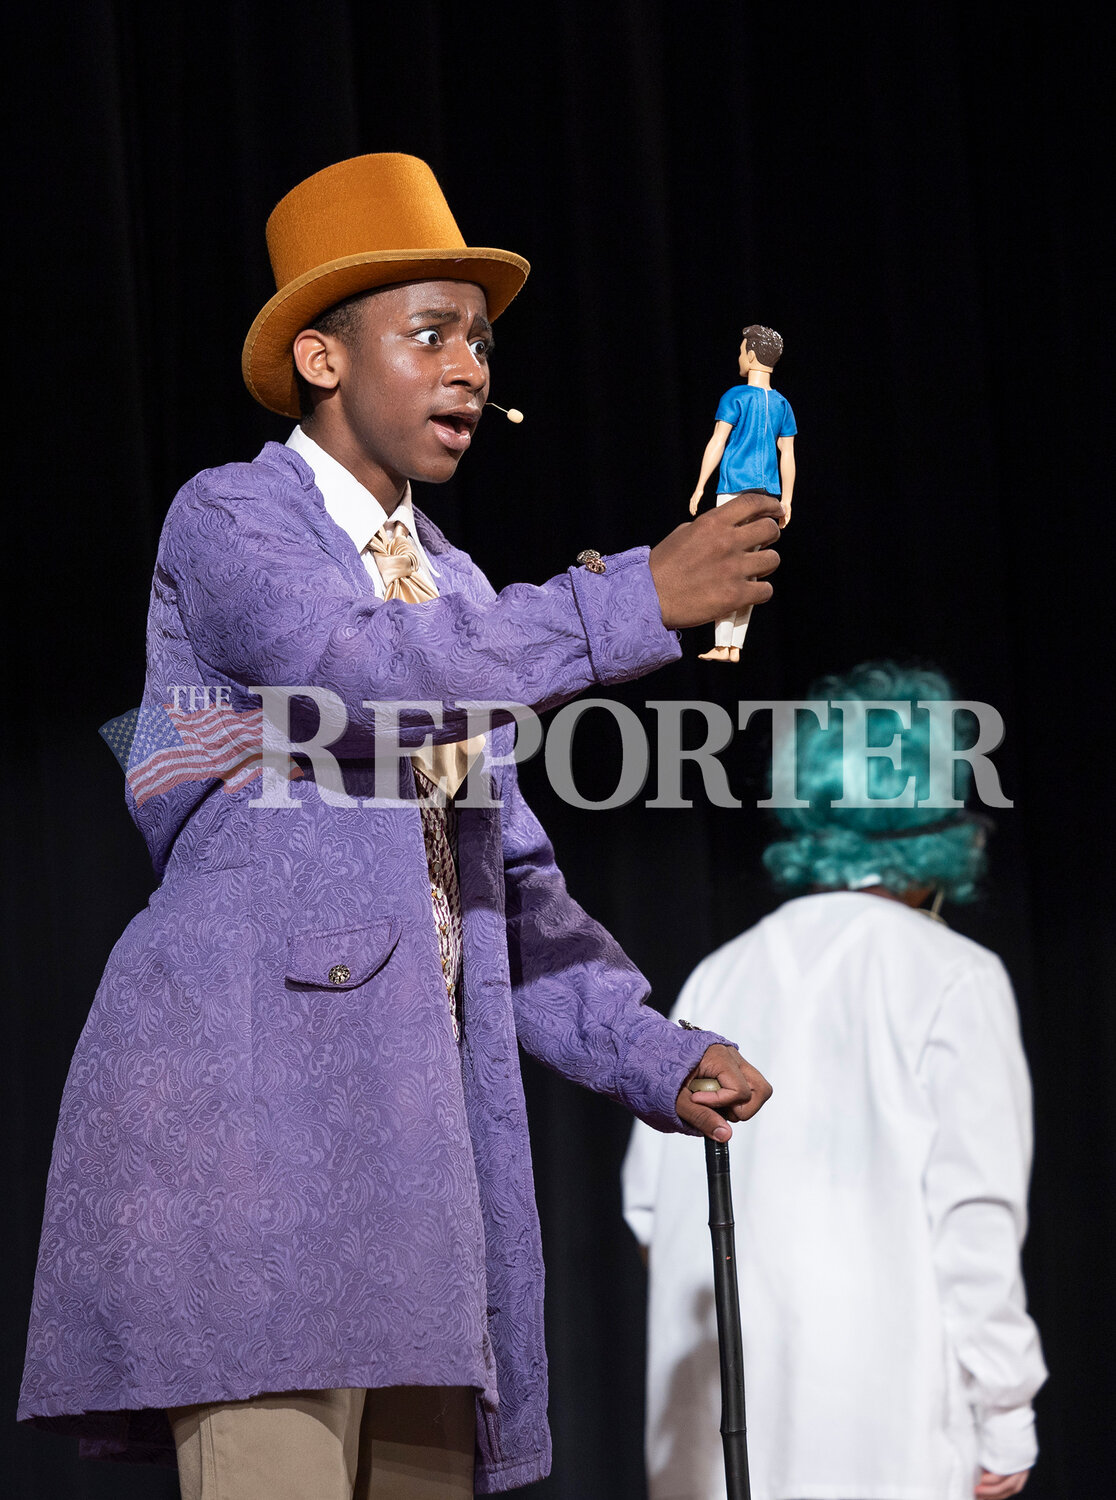 Willy Wonka played by Eli Williams reacts after Mike Teavee was shrunk during Walton Central School’s performance of Roald Dahl’s Willy Wonka Saturday, March 23.